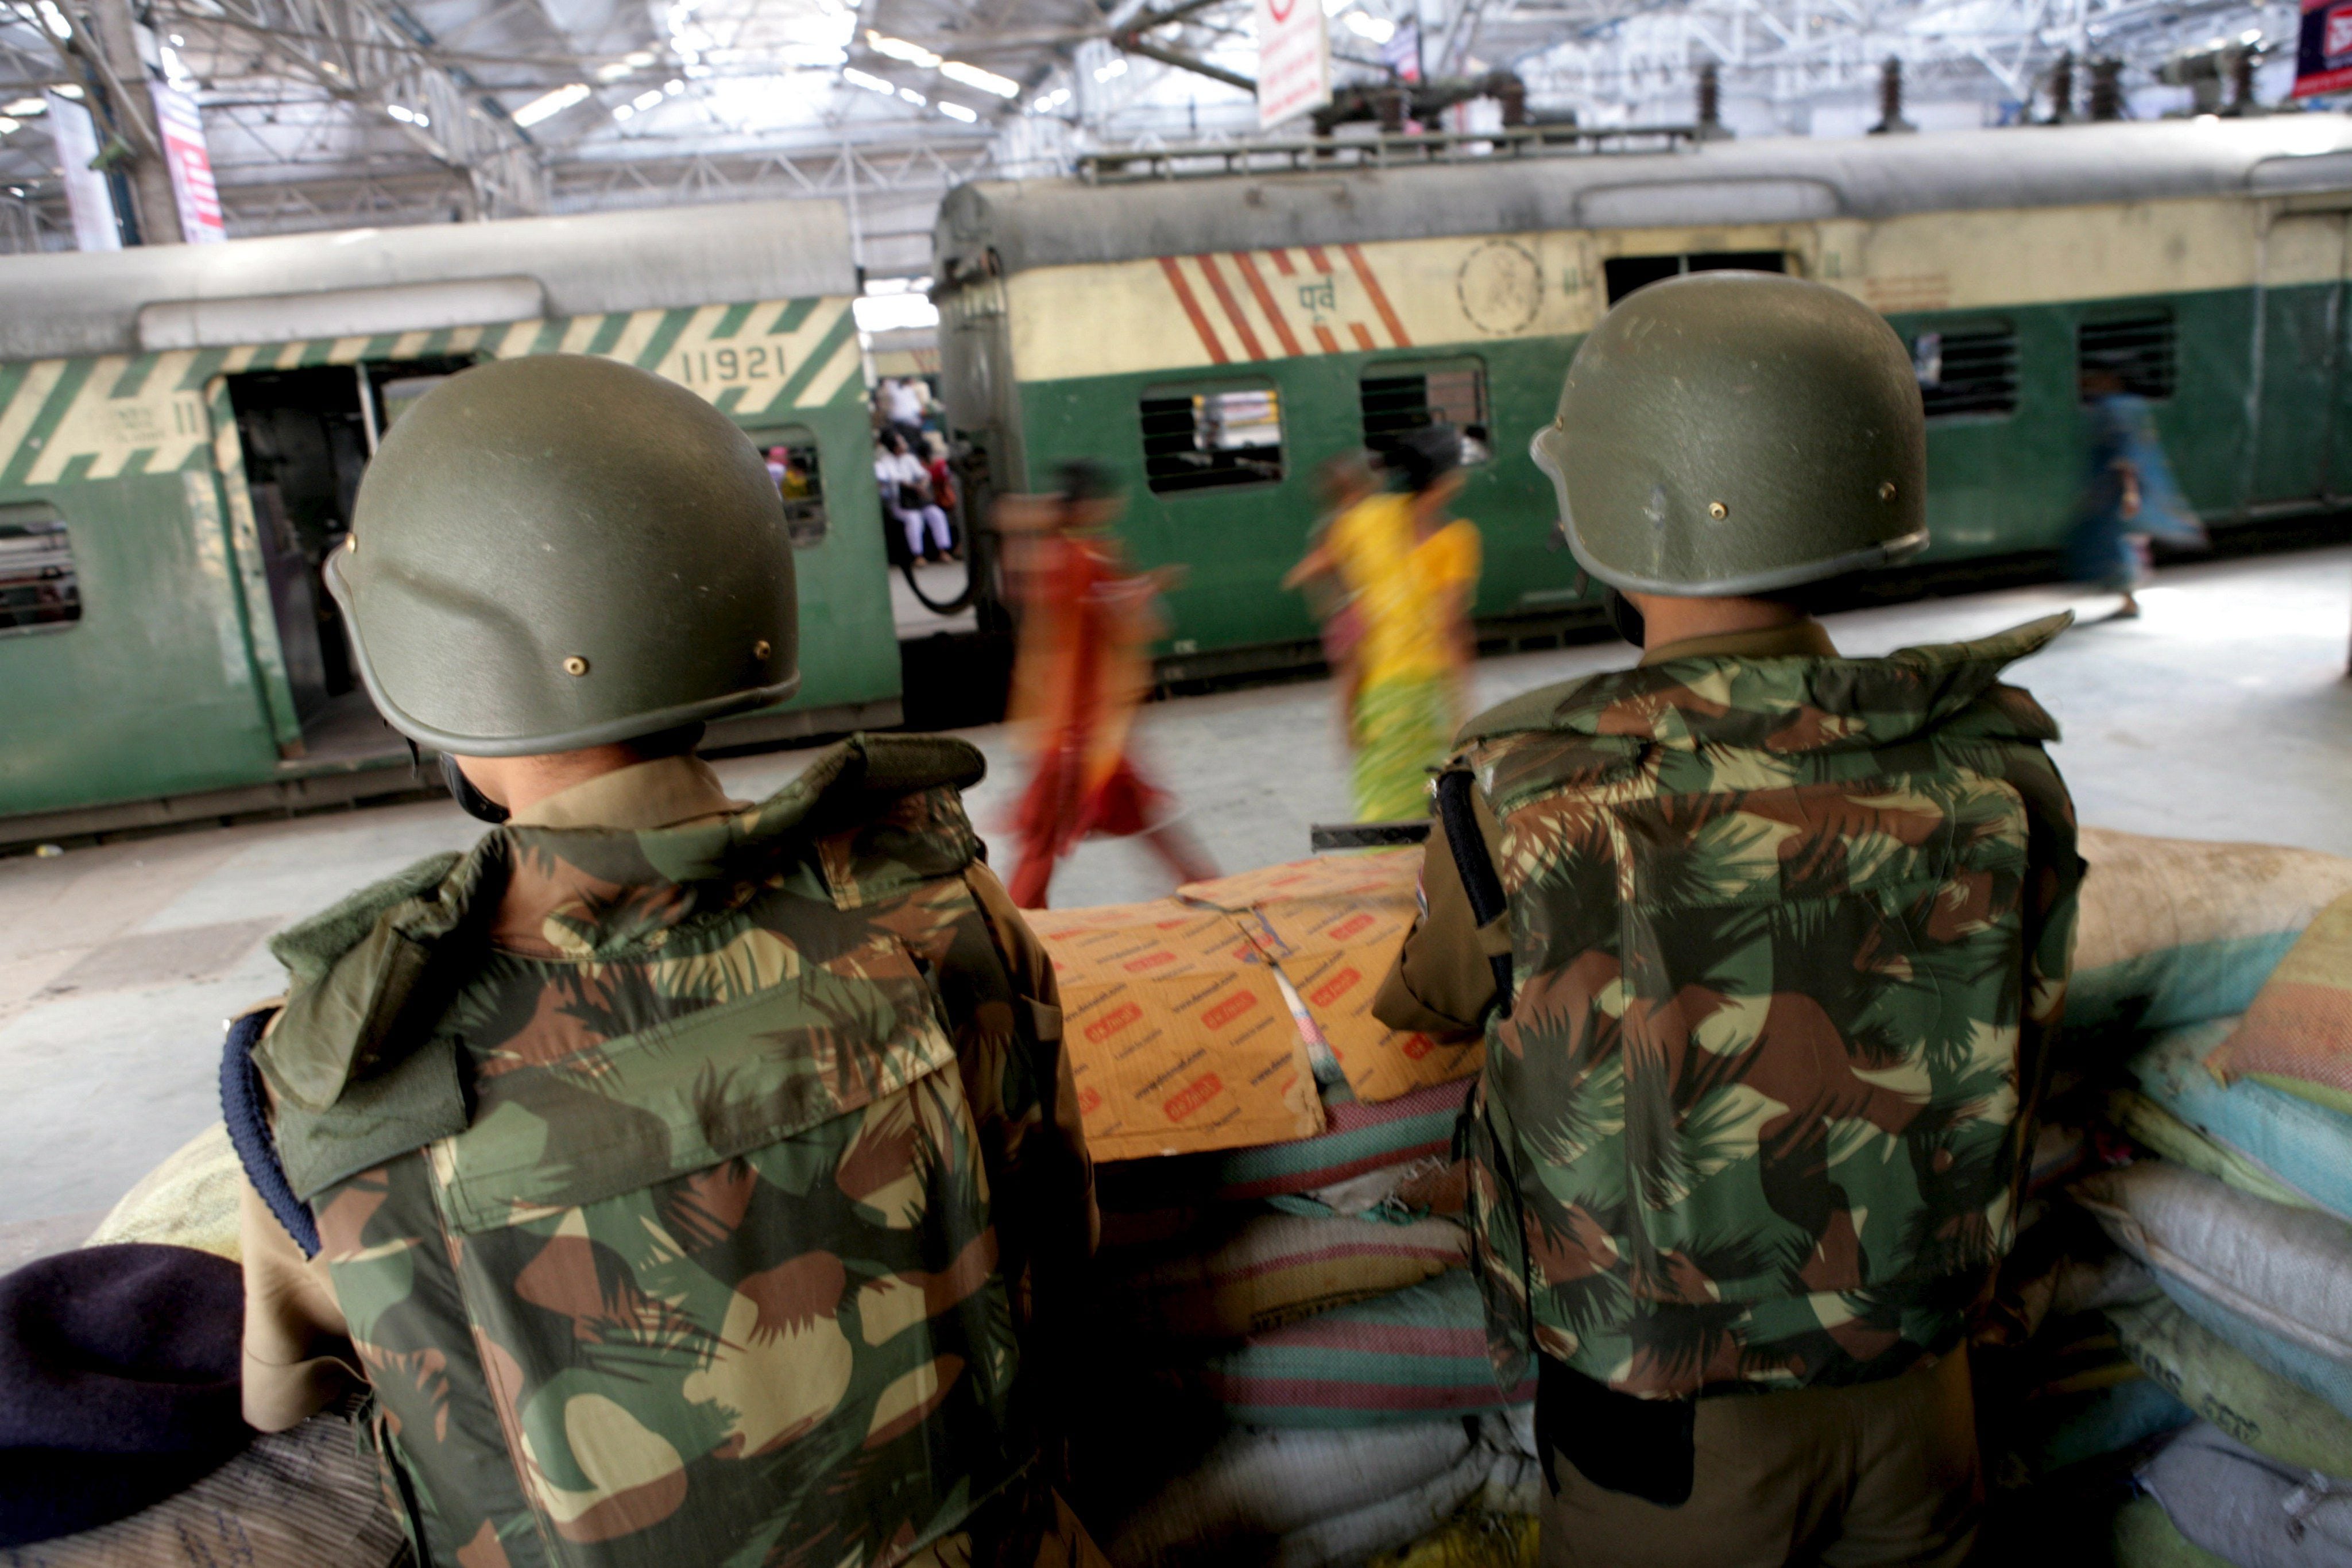 Railway Protection Force (RPF) officials guard in a bunker on Sealdha Railway Station in Kolkata, India